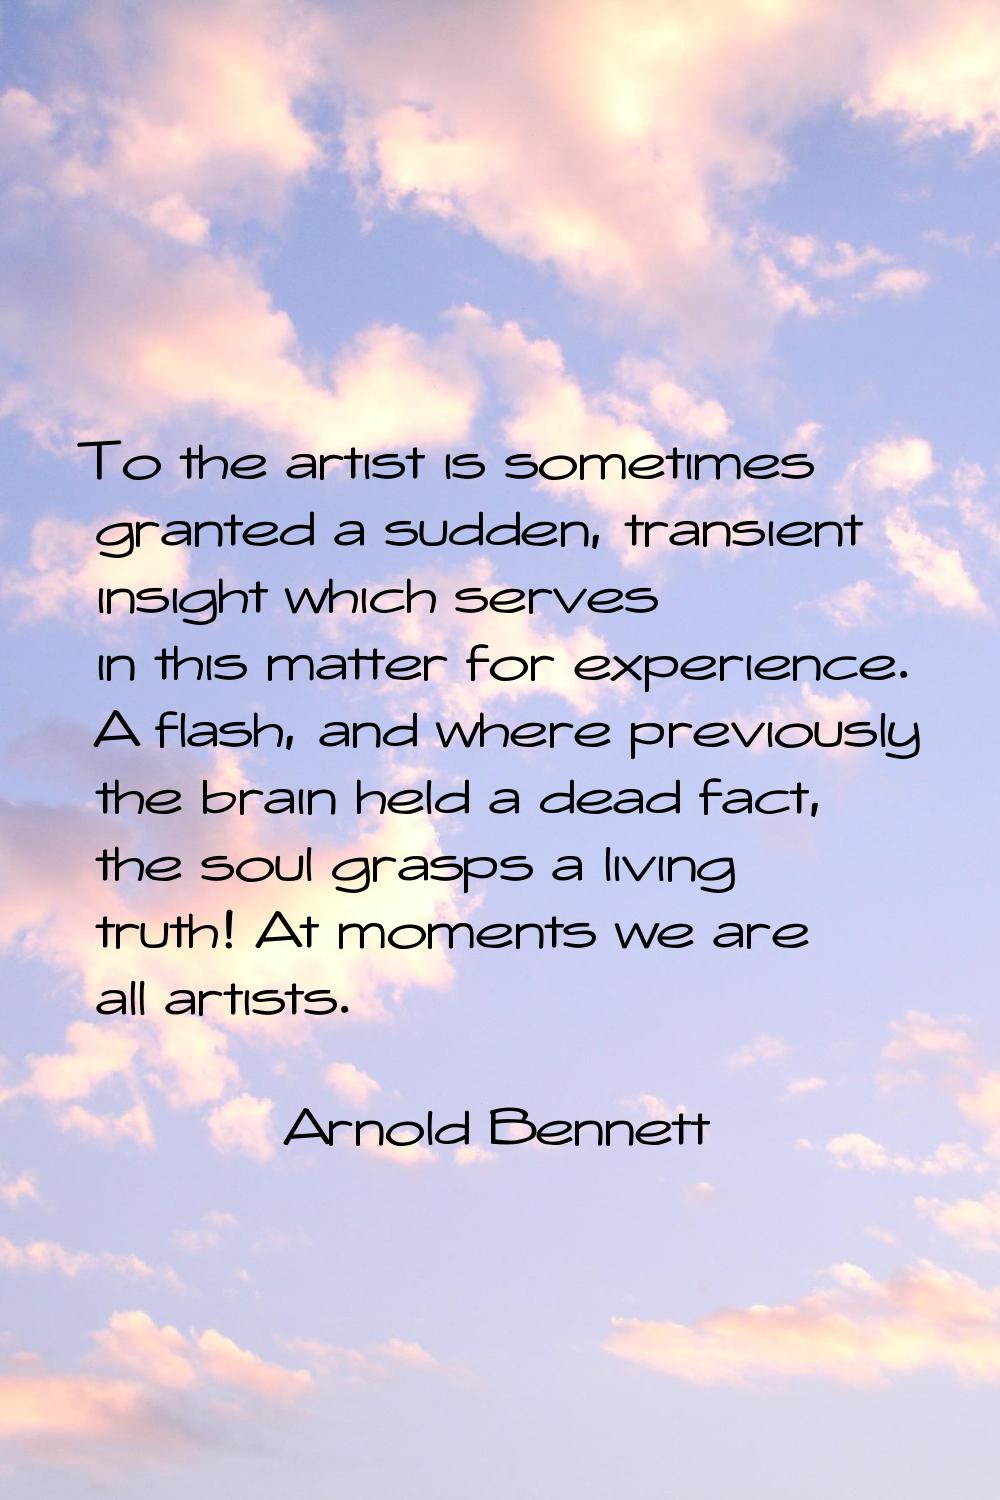 To the artist is sometimes granted a sudden, transient insight which serves in this matter for expe